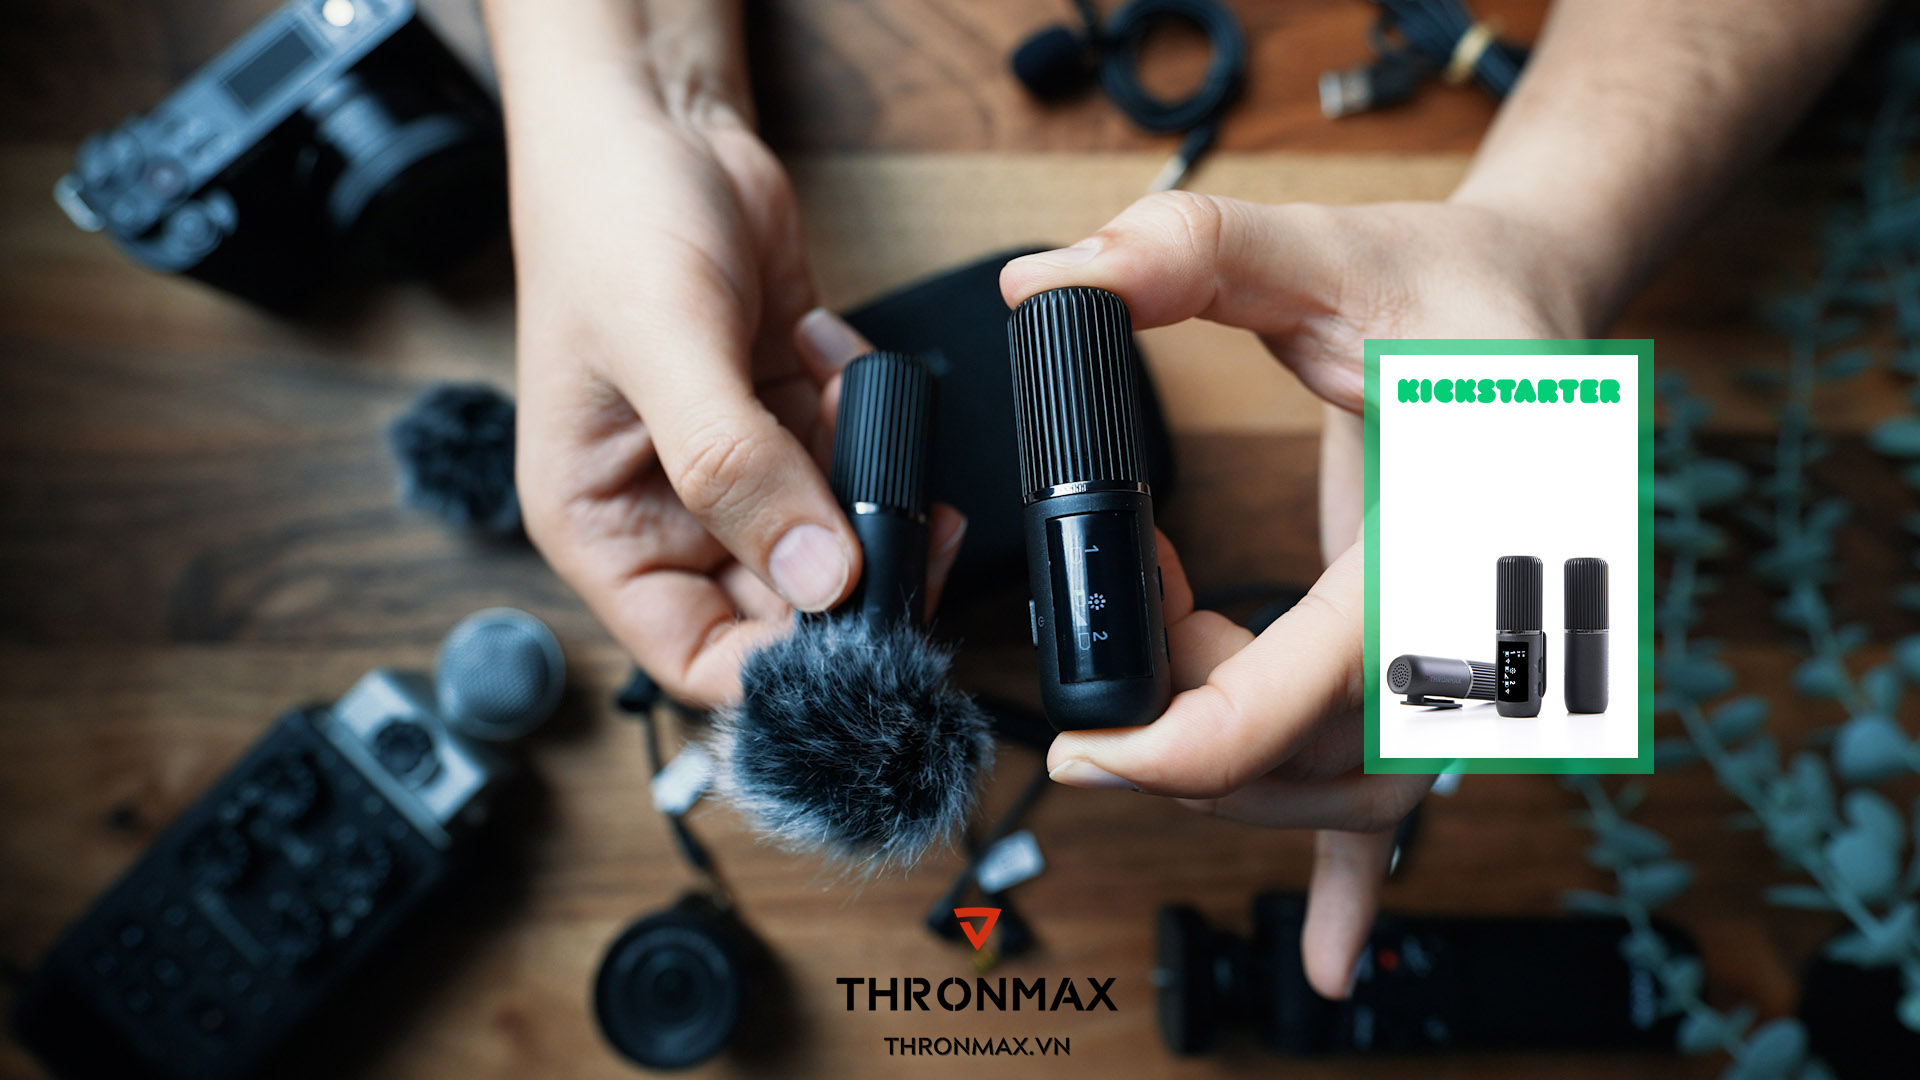 Microphone Thronmax Space Wireless không dây